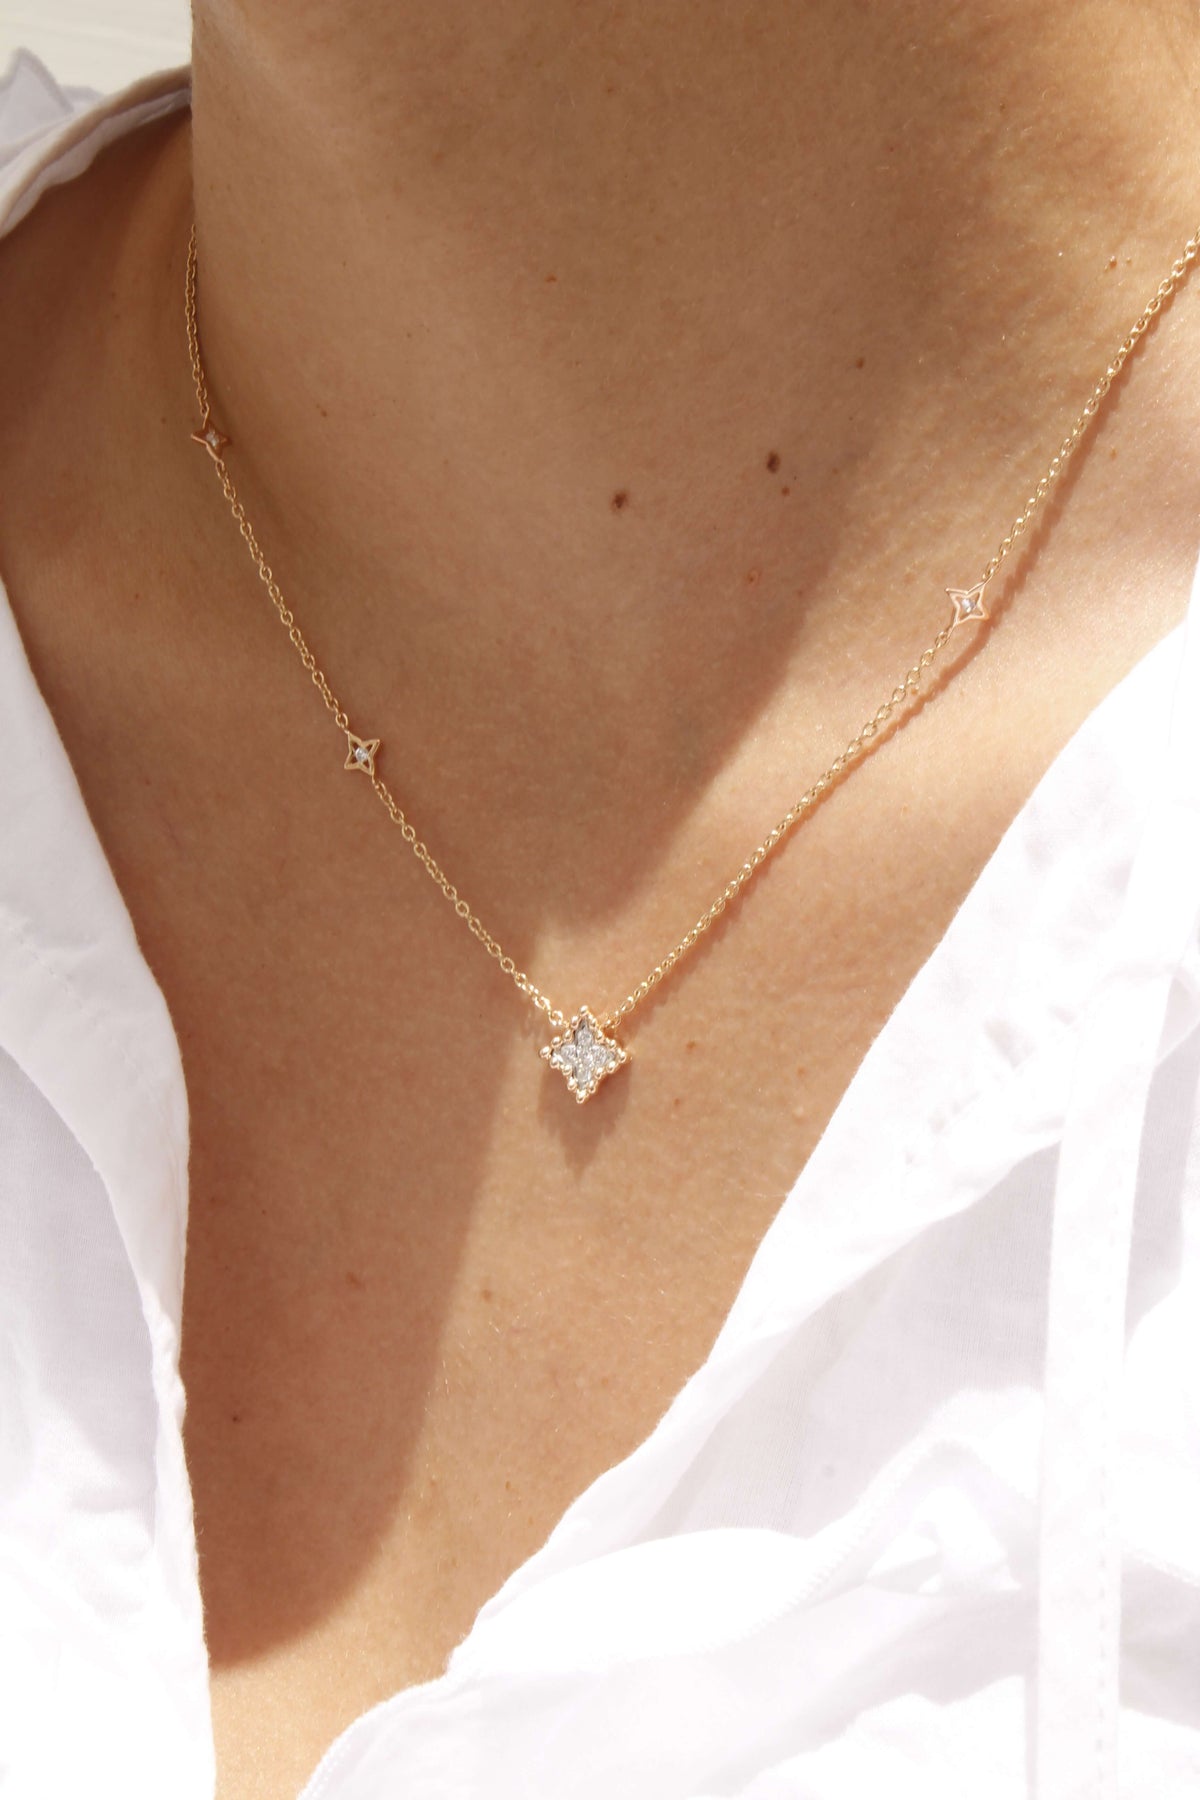 Palladio Necklace in 18k Rose Gold with Diamonds - Orsini Jewellers NZ